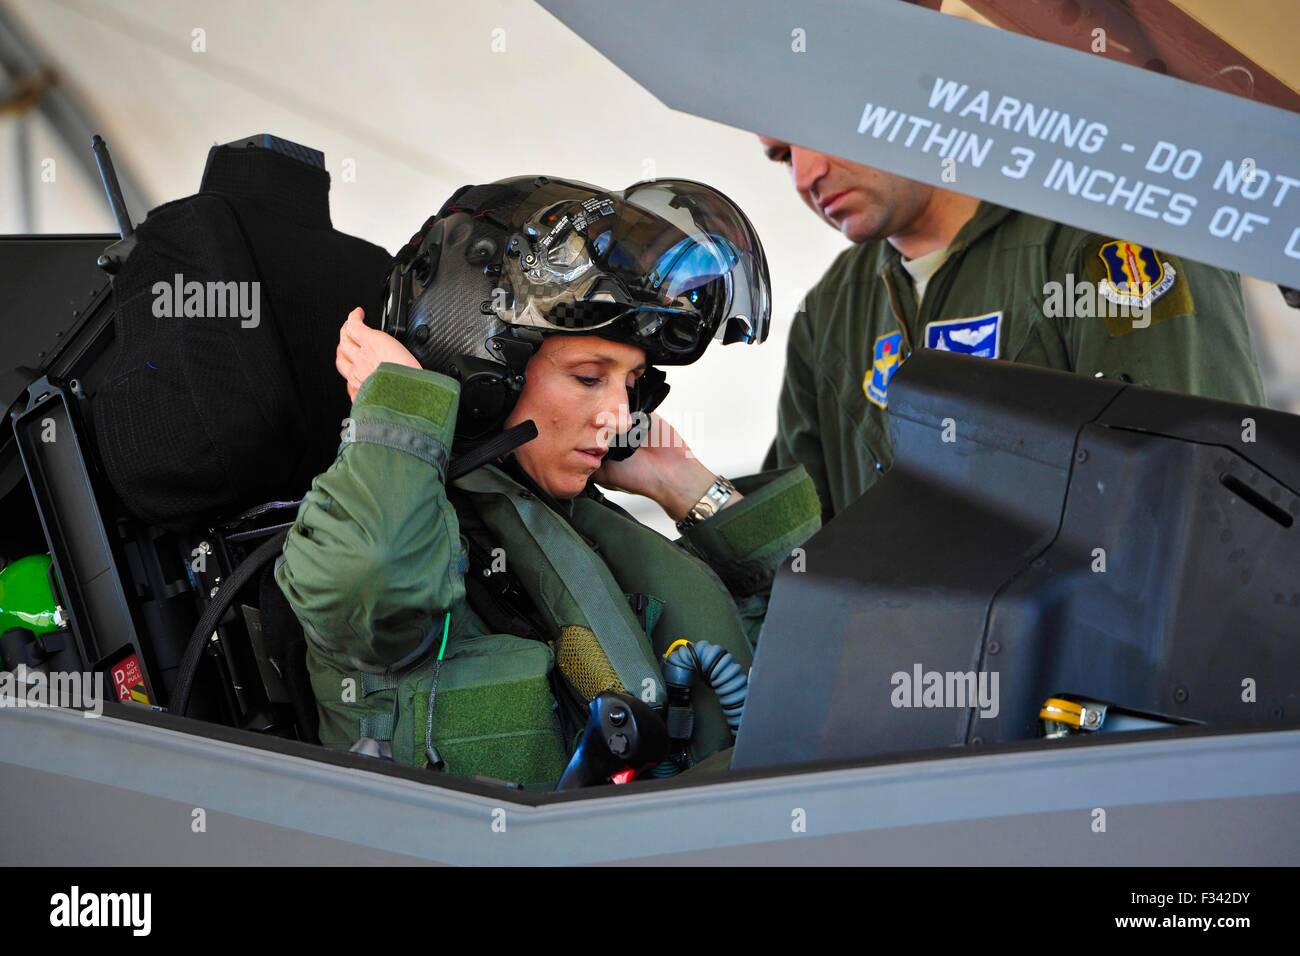 U.S. Air Force Lt. Col. Christine Mau puts on her helmet before taking her first flight in the F-35A stealth fighter aircraft May 5, 2015 in Eglin Air Force Base, Florida. Mau, who previously flew F-15E Strike Eagles, made history as the first female F-35 pilot in the program. Stock Photo